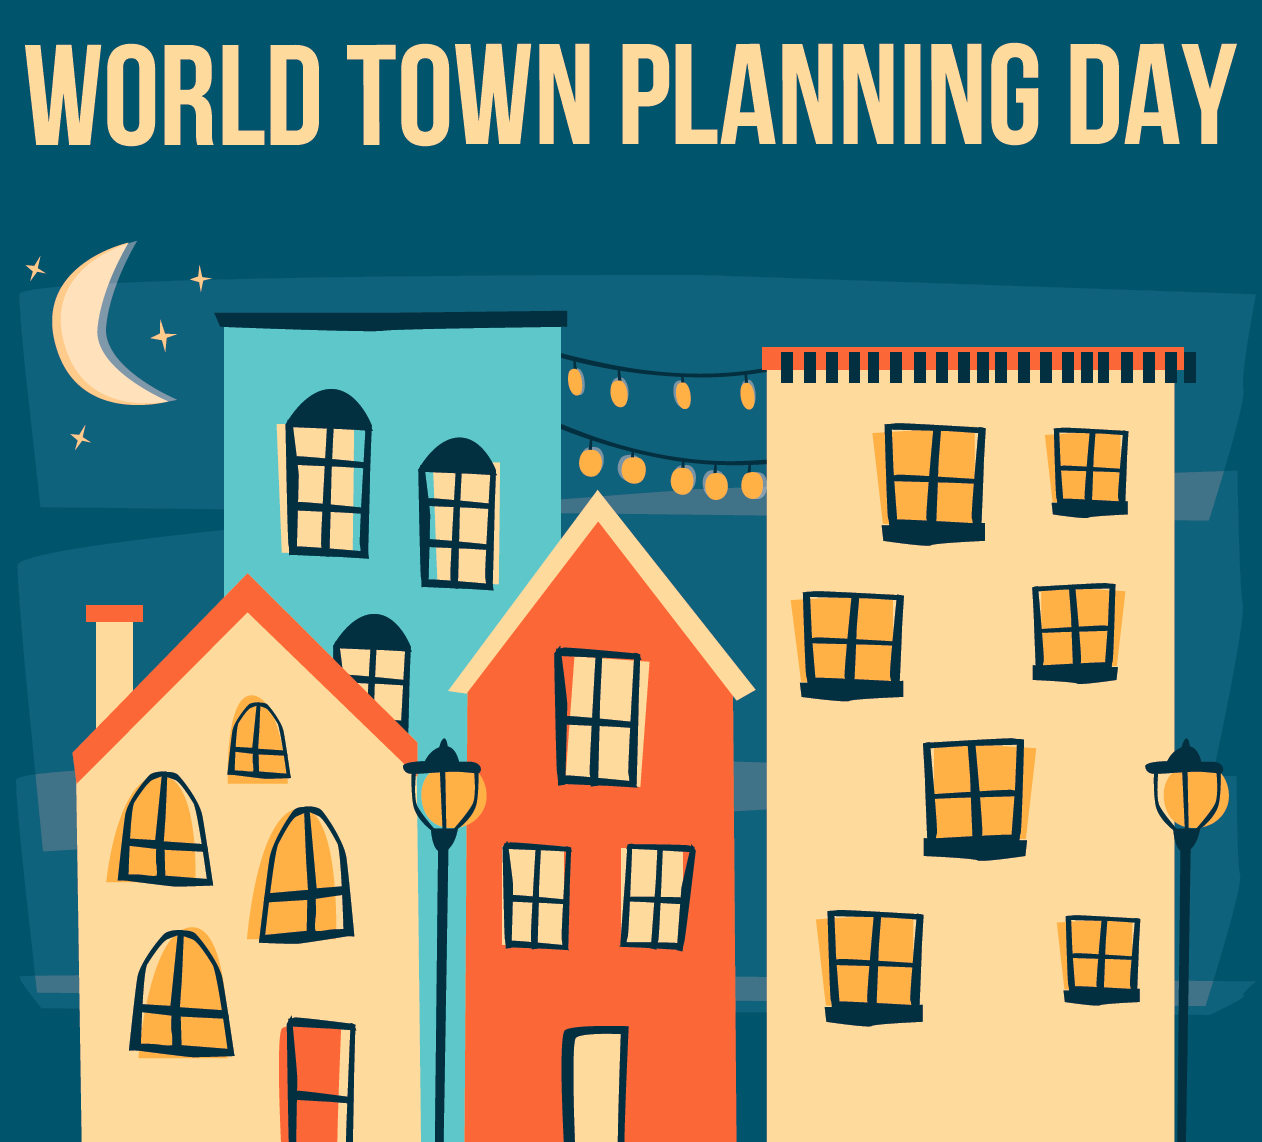 School of Planning hosts successful World Planning Day virtual event